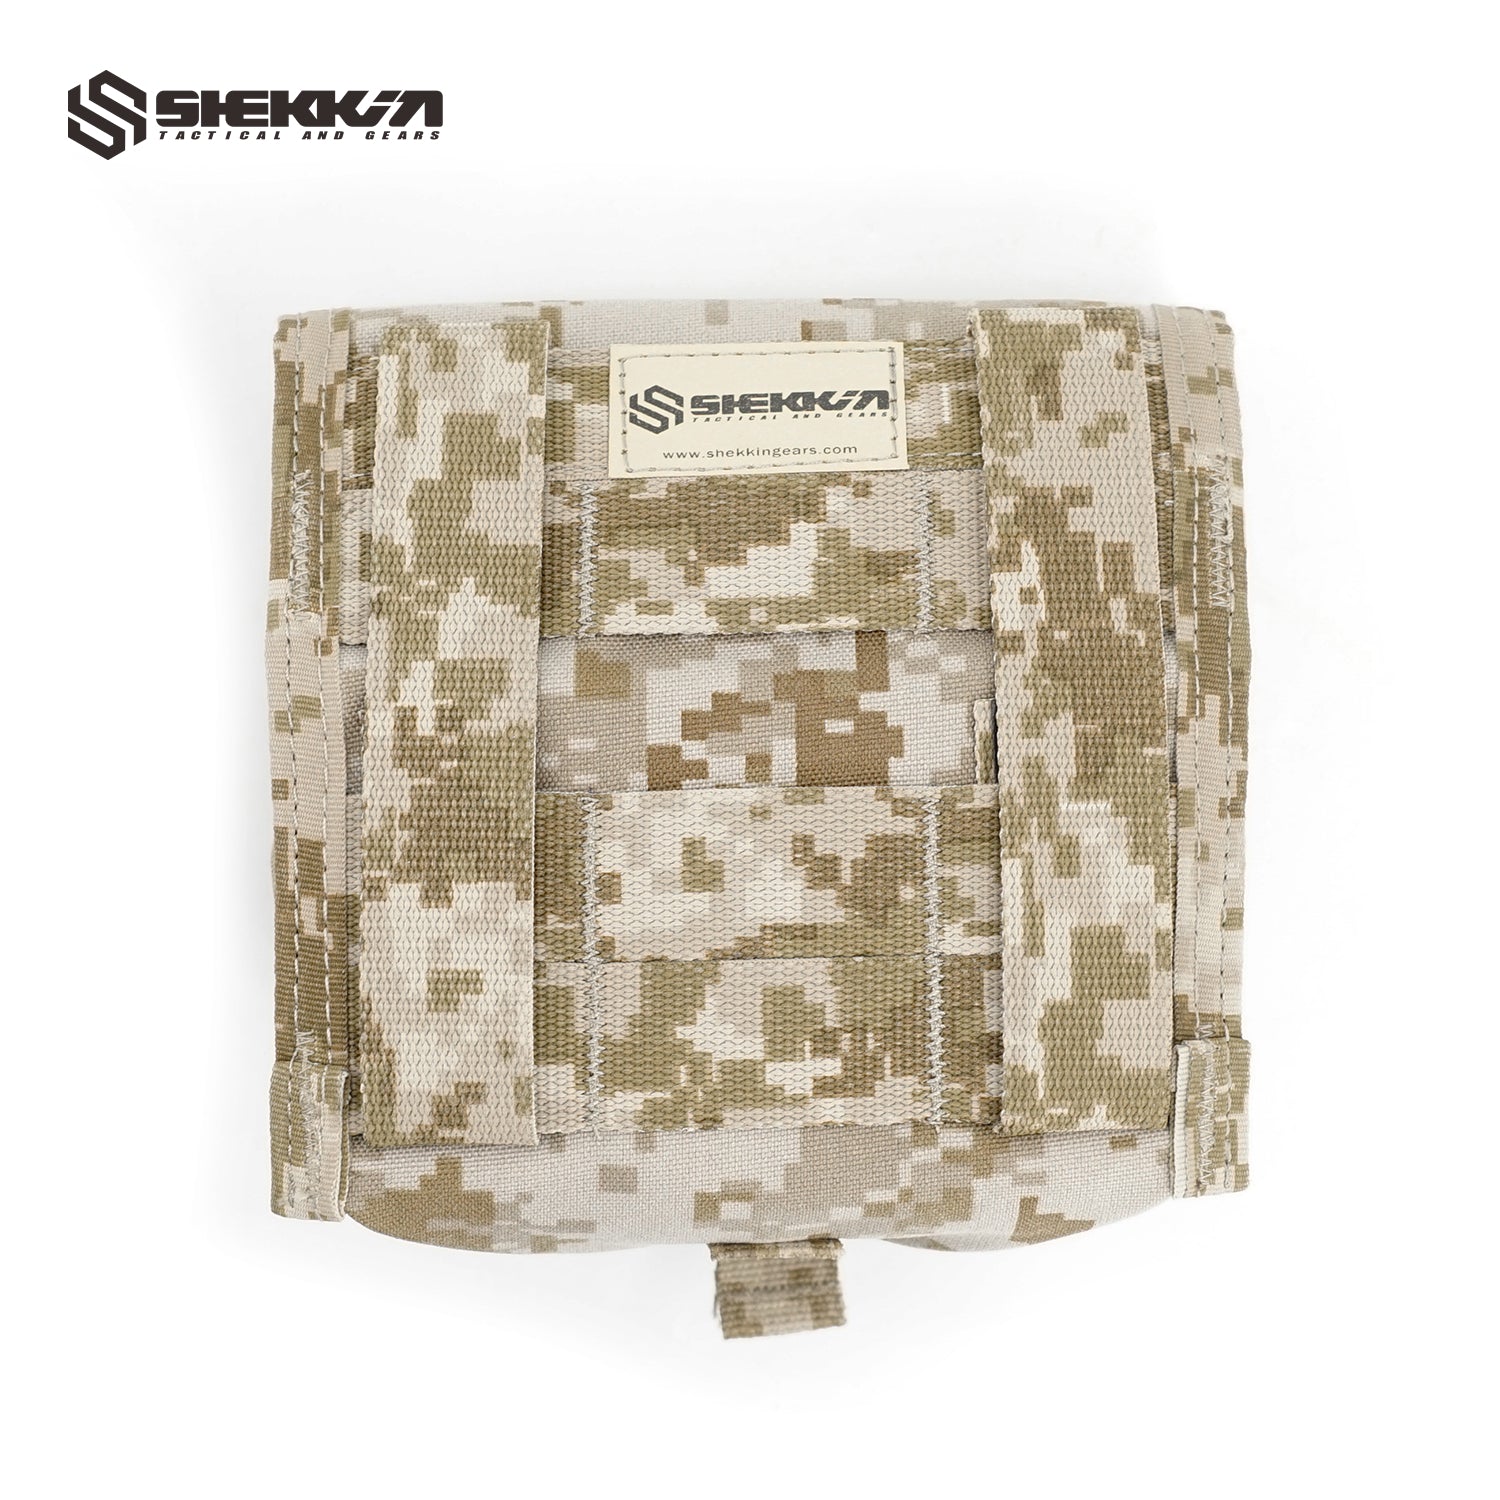 LBT style 6074 AOR1 NVG pouch